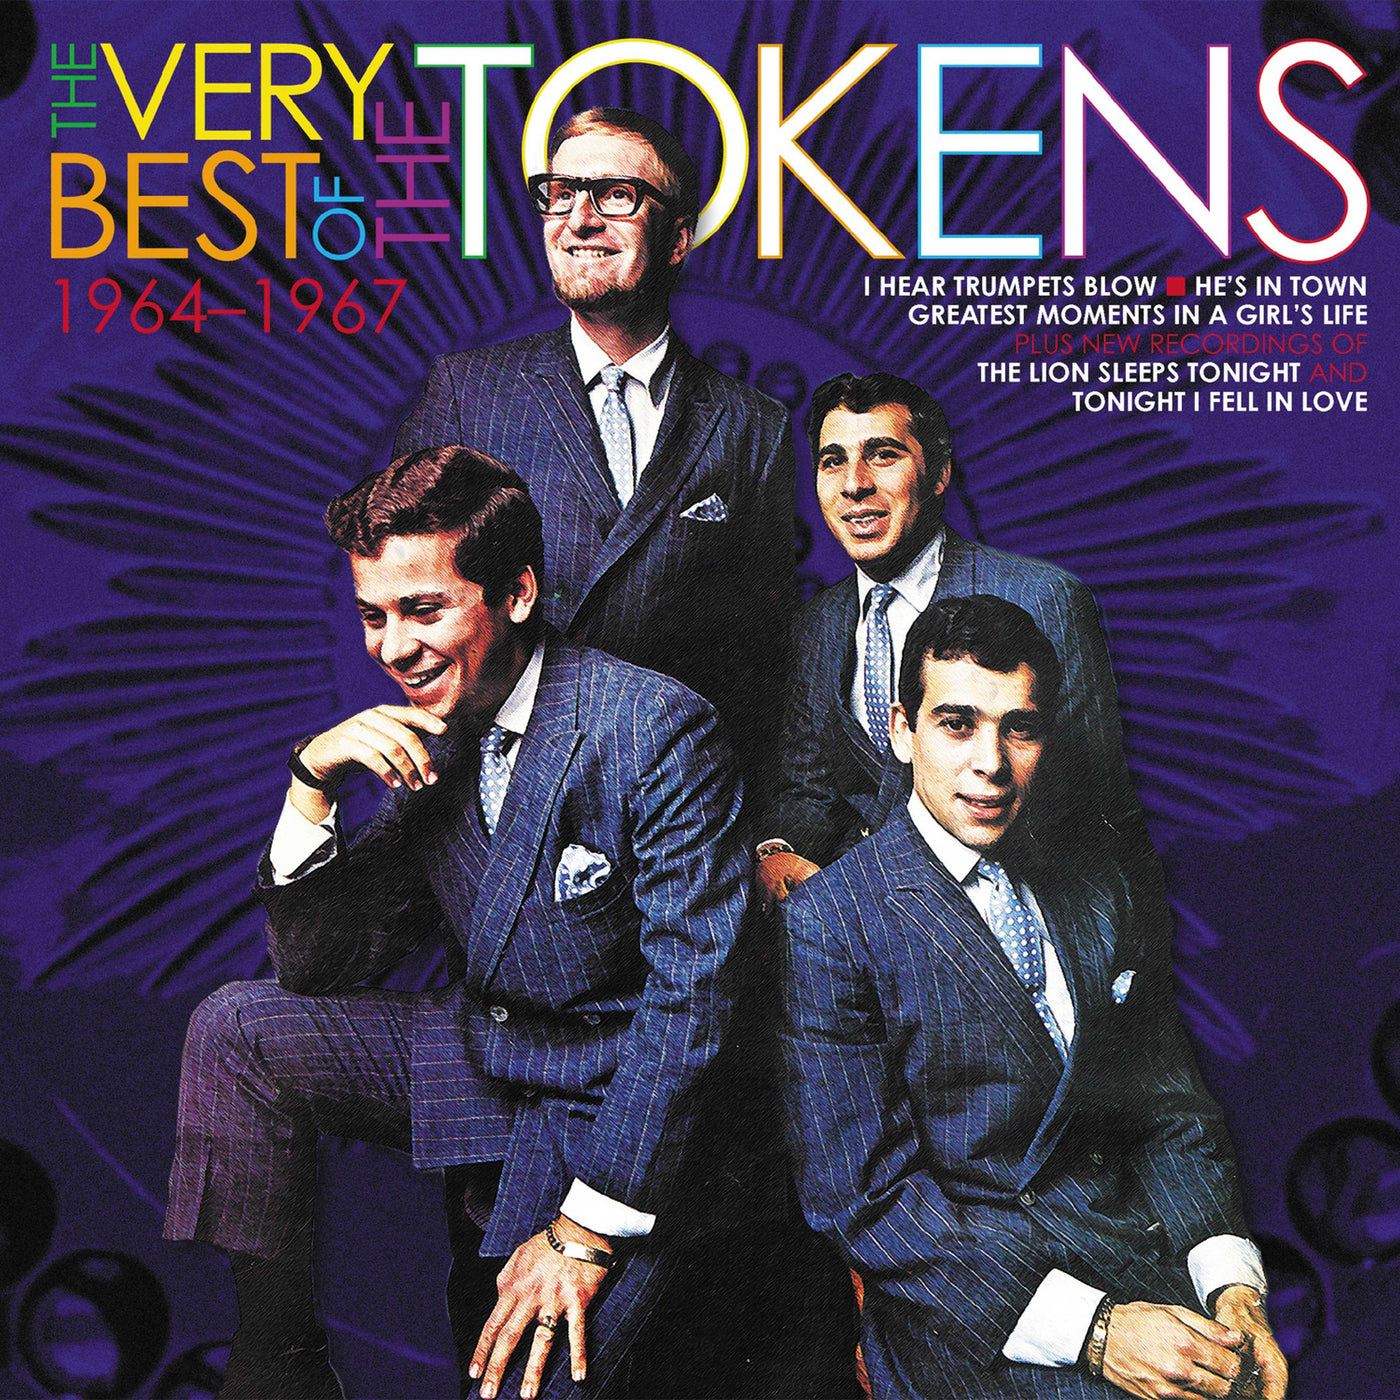 Tokens, The: The Very Best Of The Tokens:The B.T. Puppy Years 1964-1967 (CD)